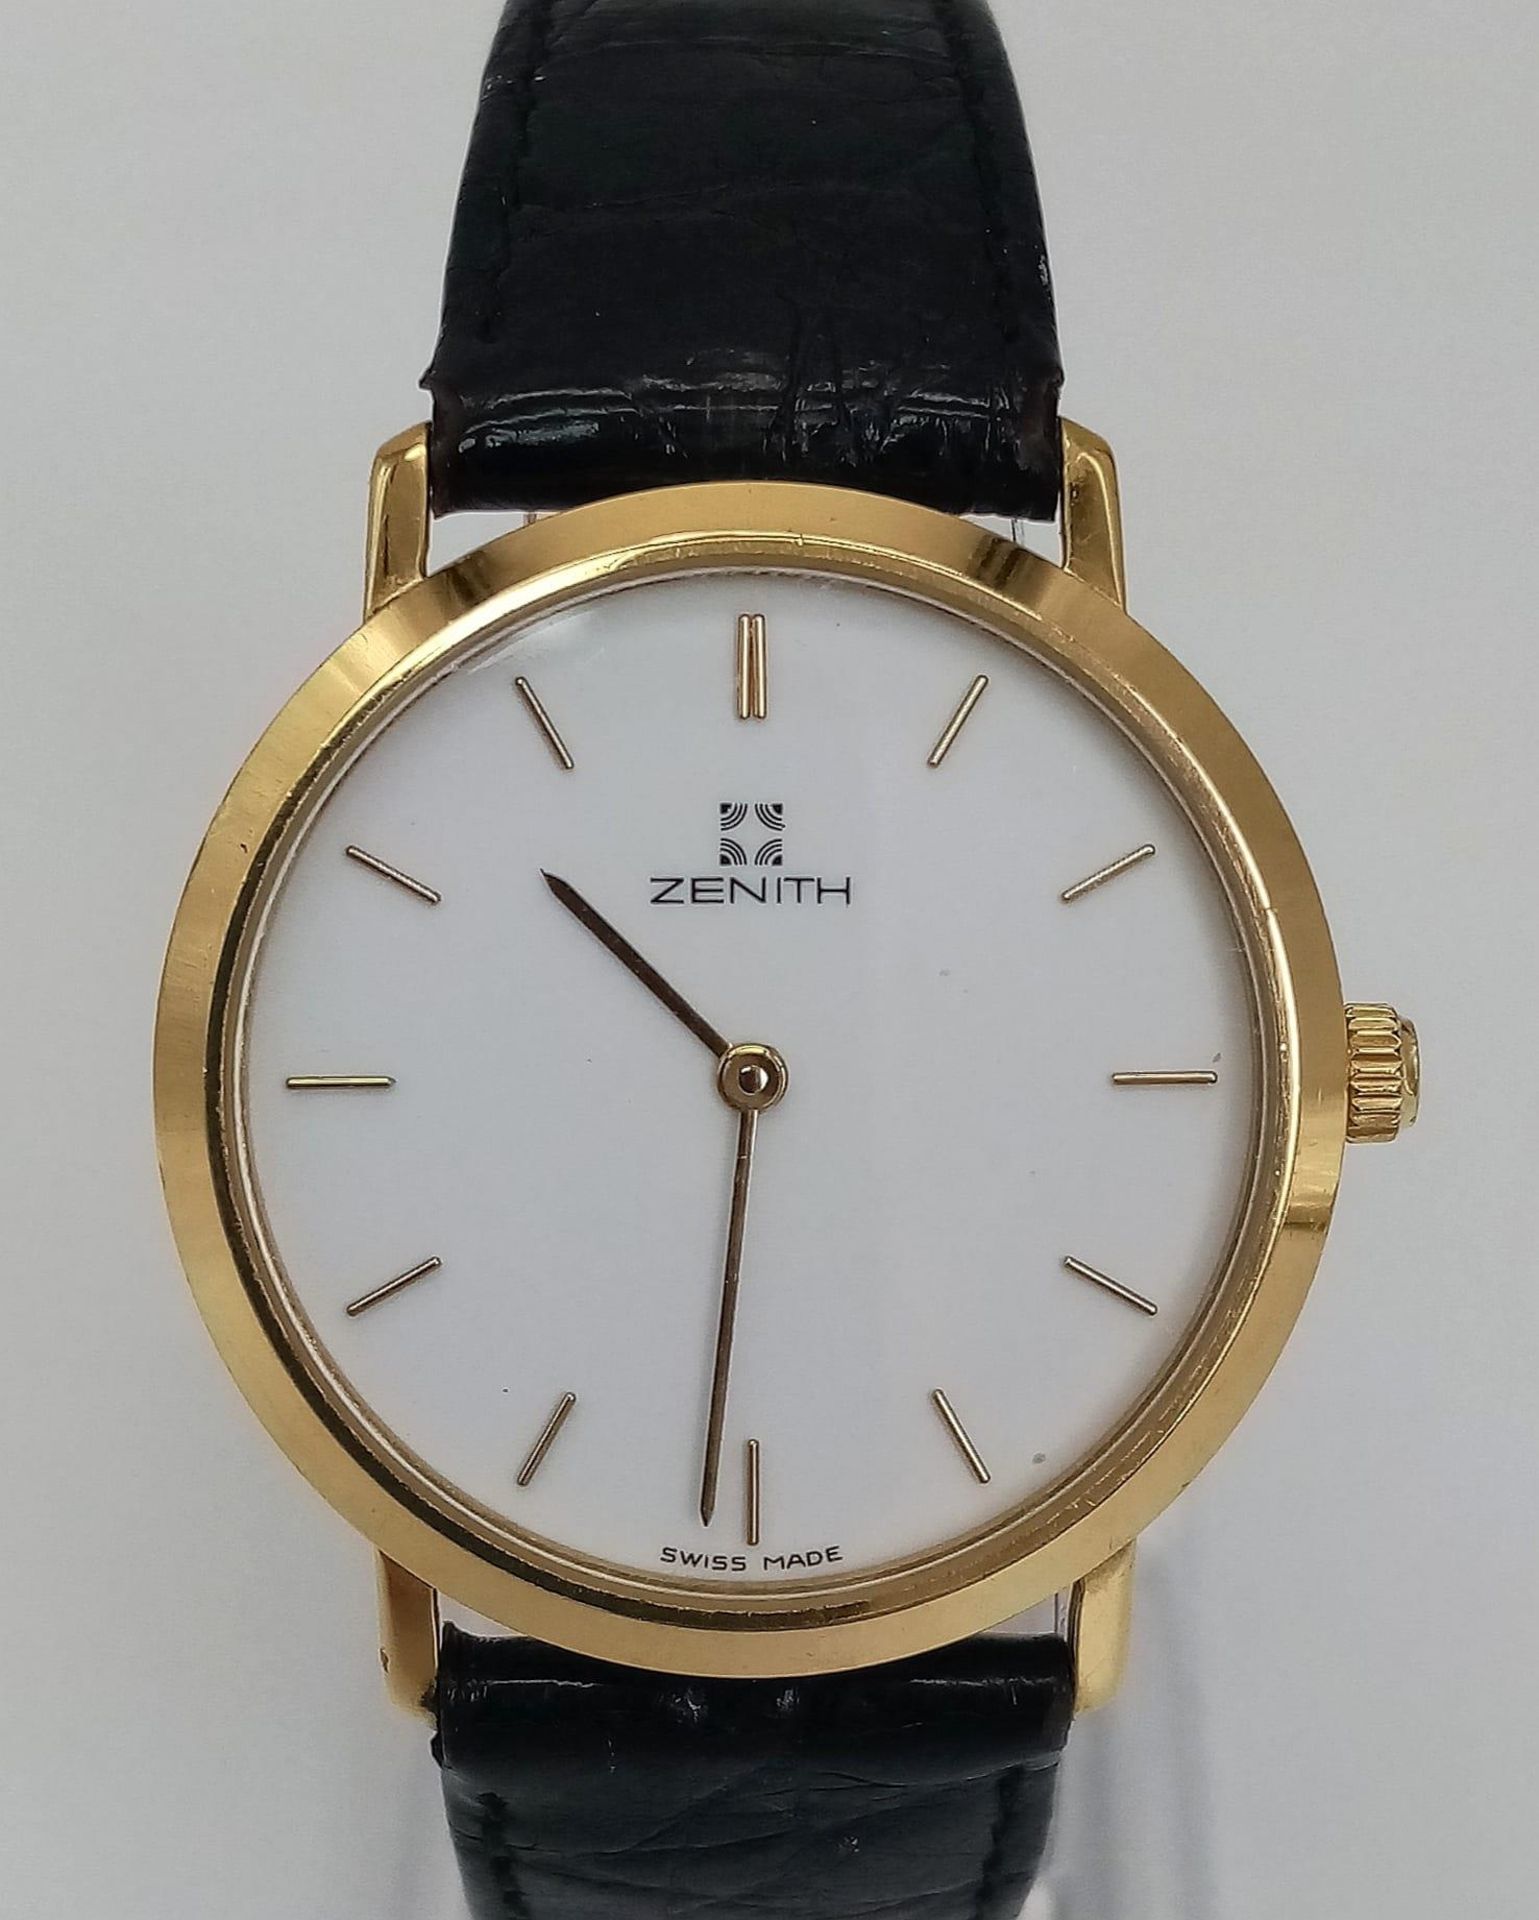 A Vintage Zenith Mechanical Gents Watch. Black leather strap. Two-tone case - 33mm. White